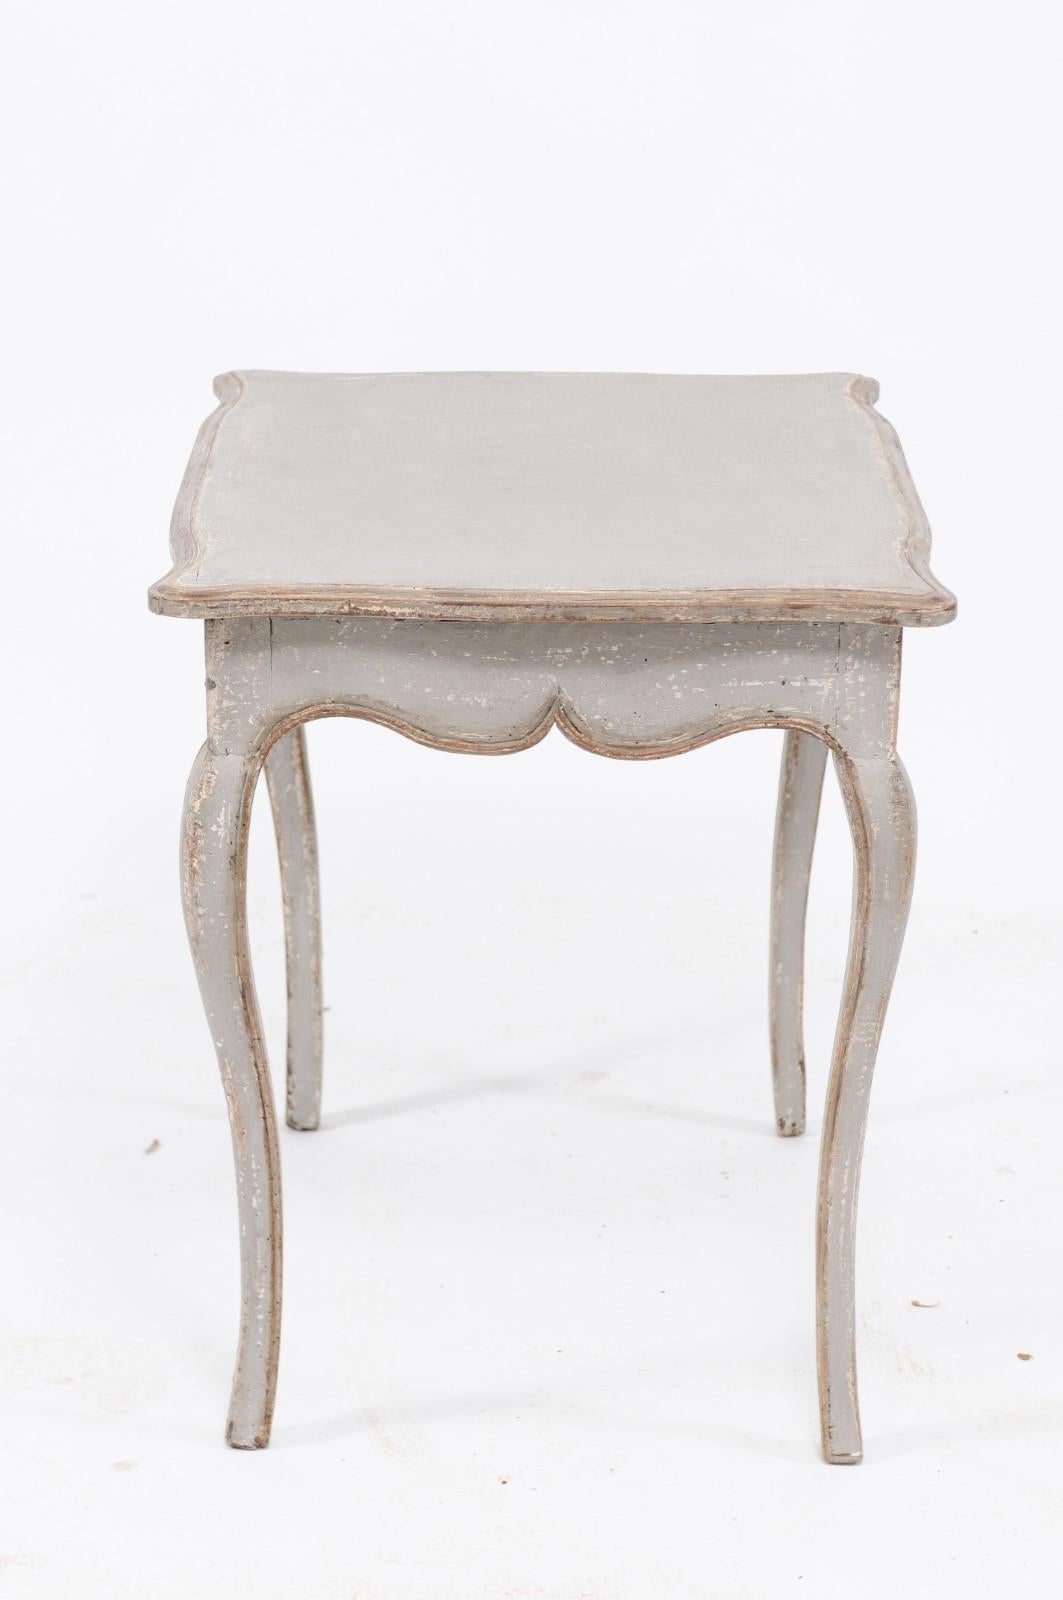 French Louis XV Style Grey Painted Pine Table with Single Drawer, circa 1880 (19. Jahrhundert)